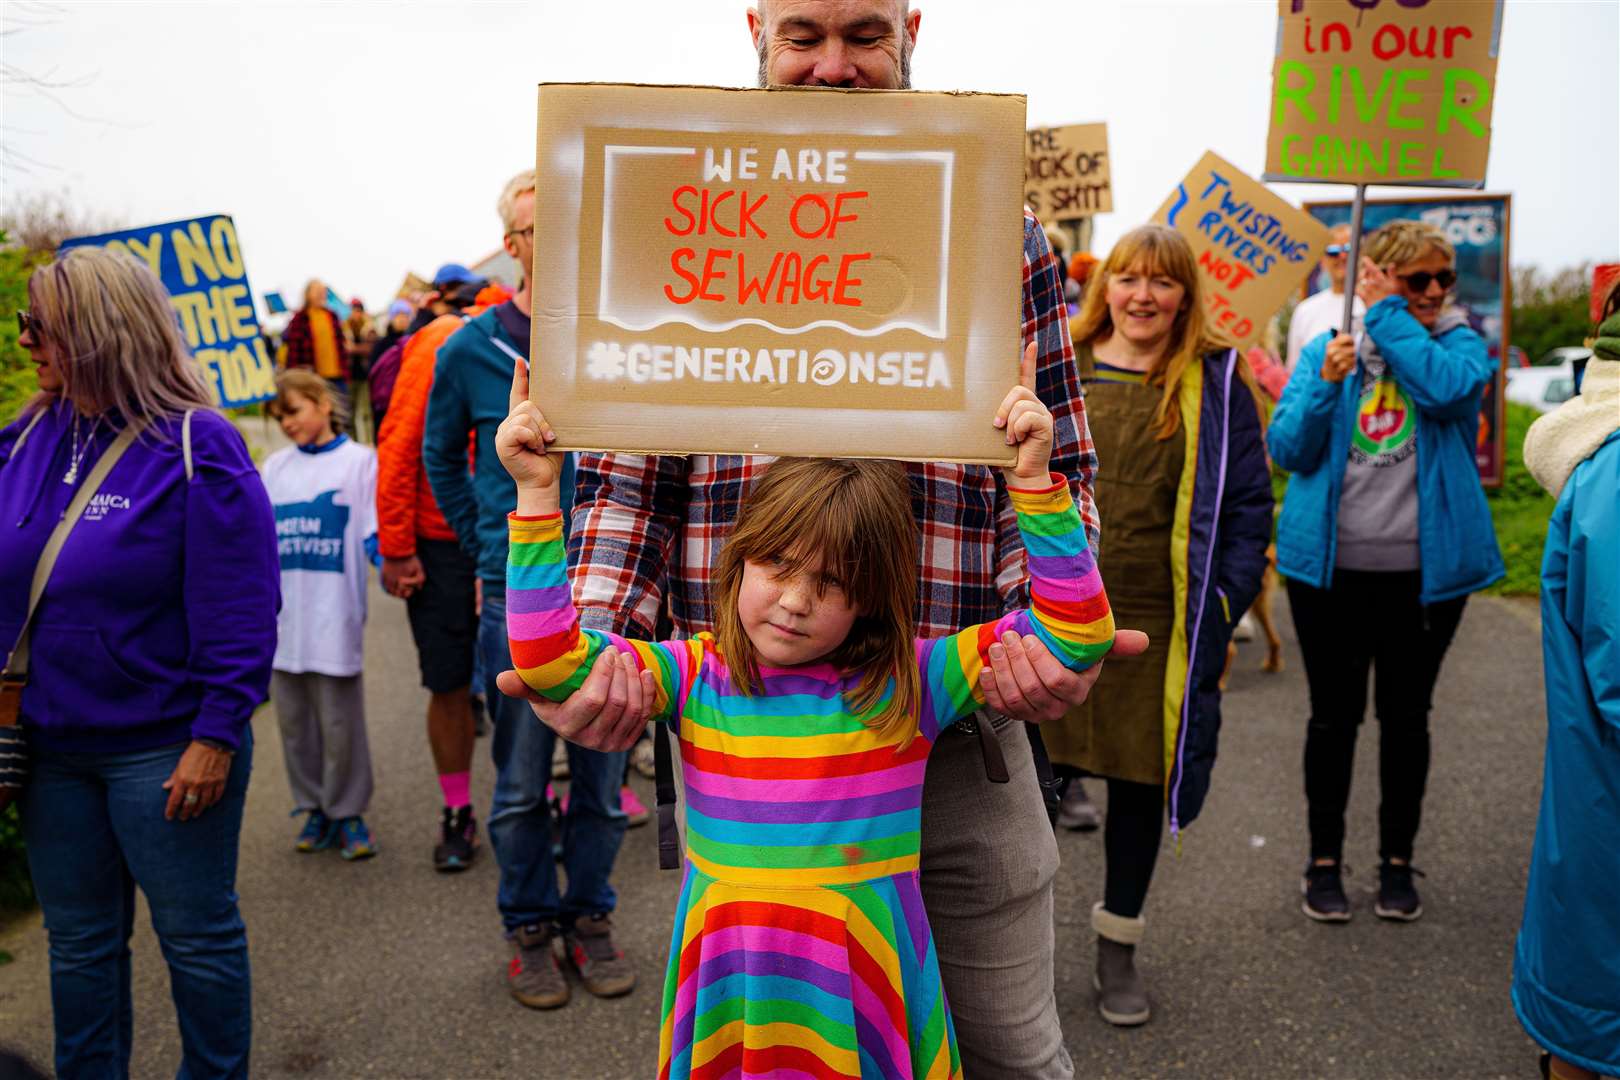 Campaigners march near Fistral Beach, Newquay, as they took part in a National Day of Action on Sewage Pollution in April 2022 (Ben Birchall/PA)